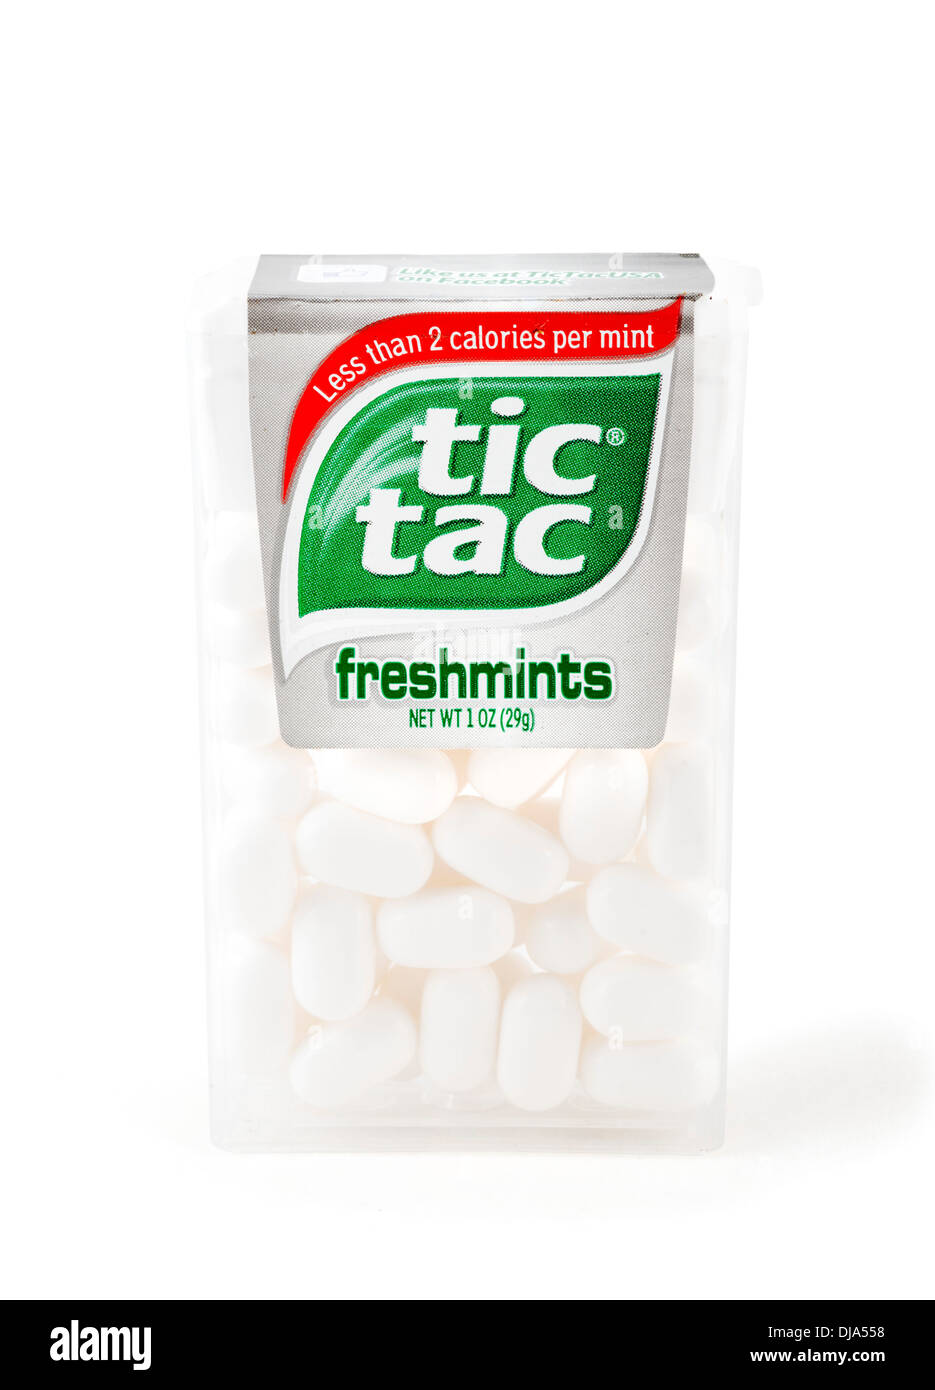 Pack of Tic Tac mints, USA Stock Photo